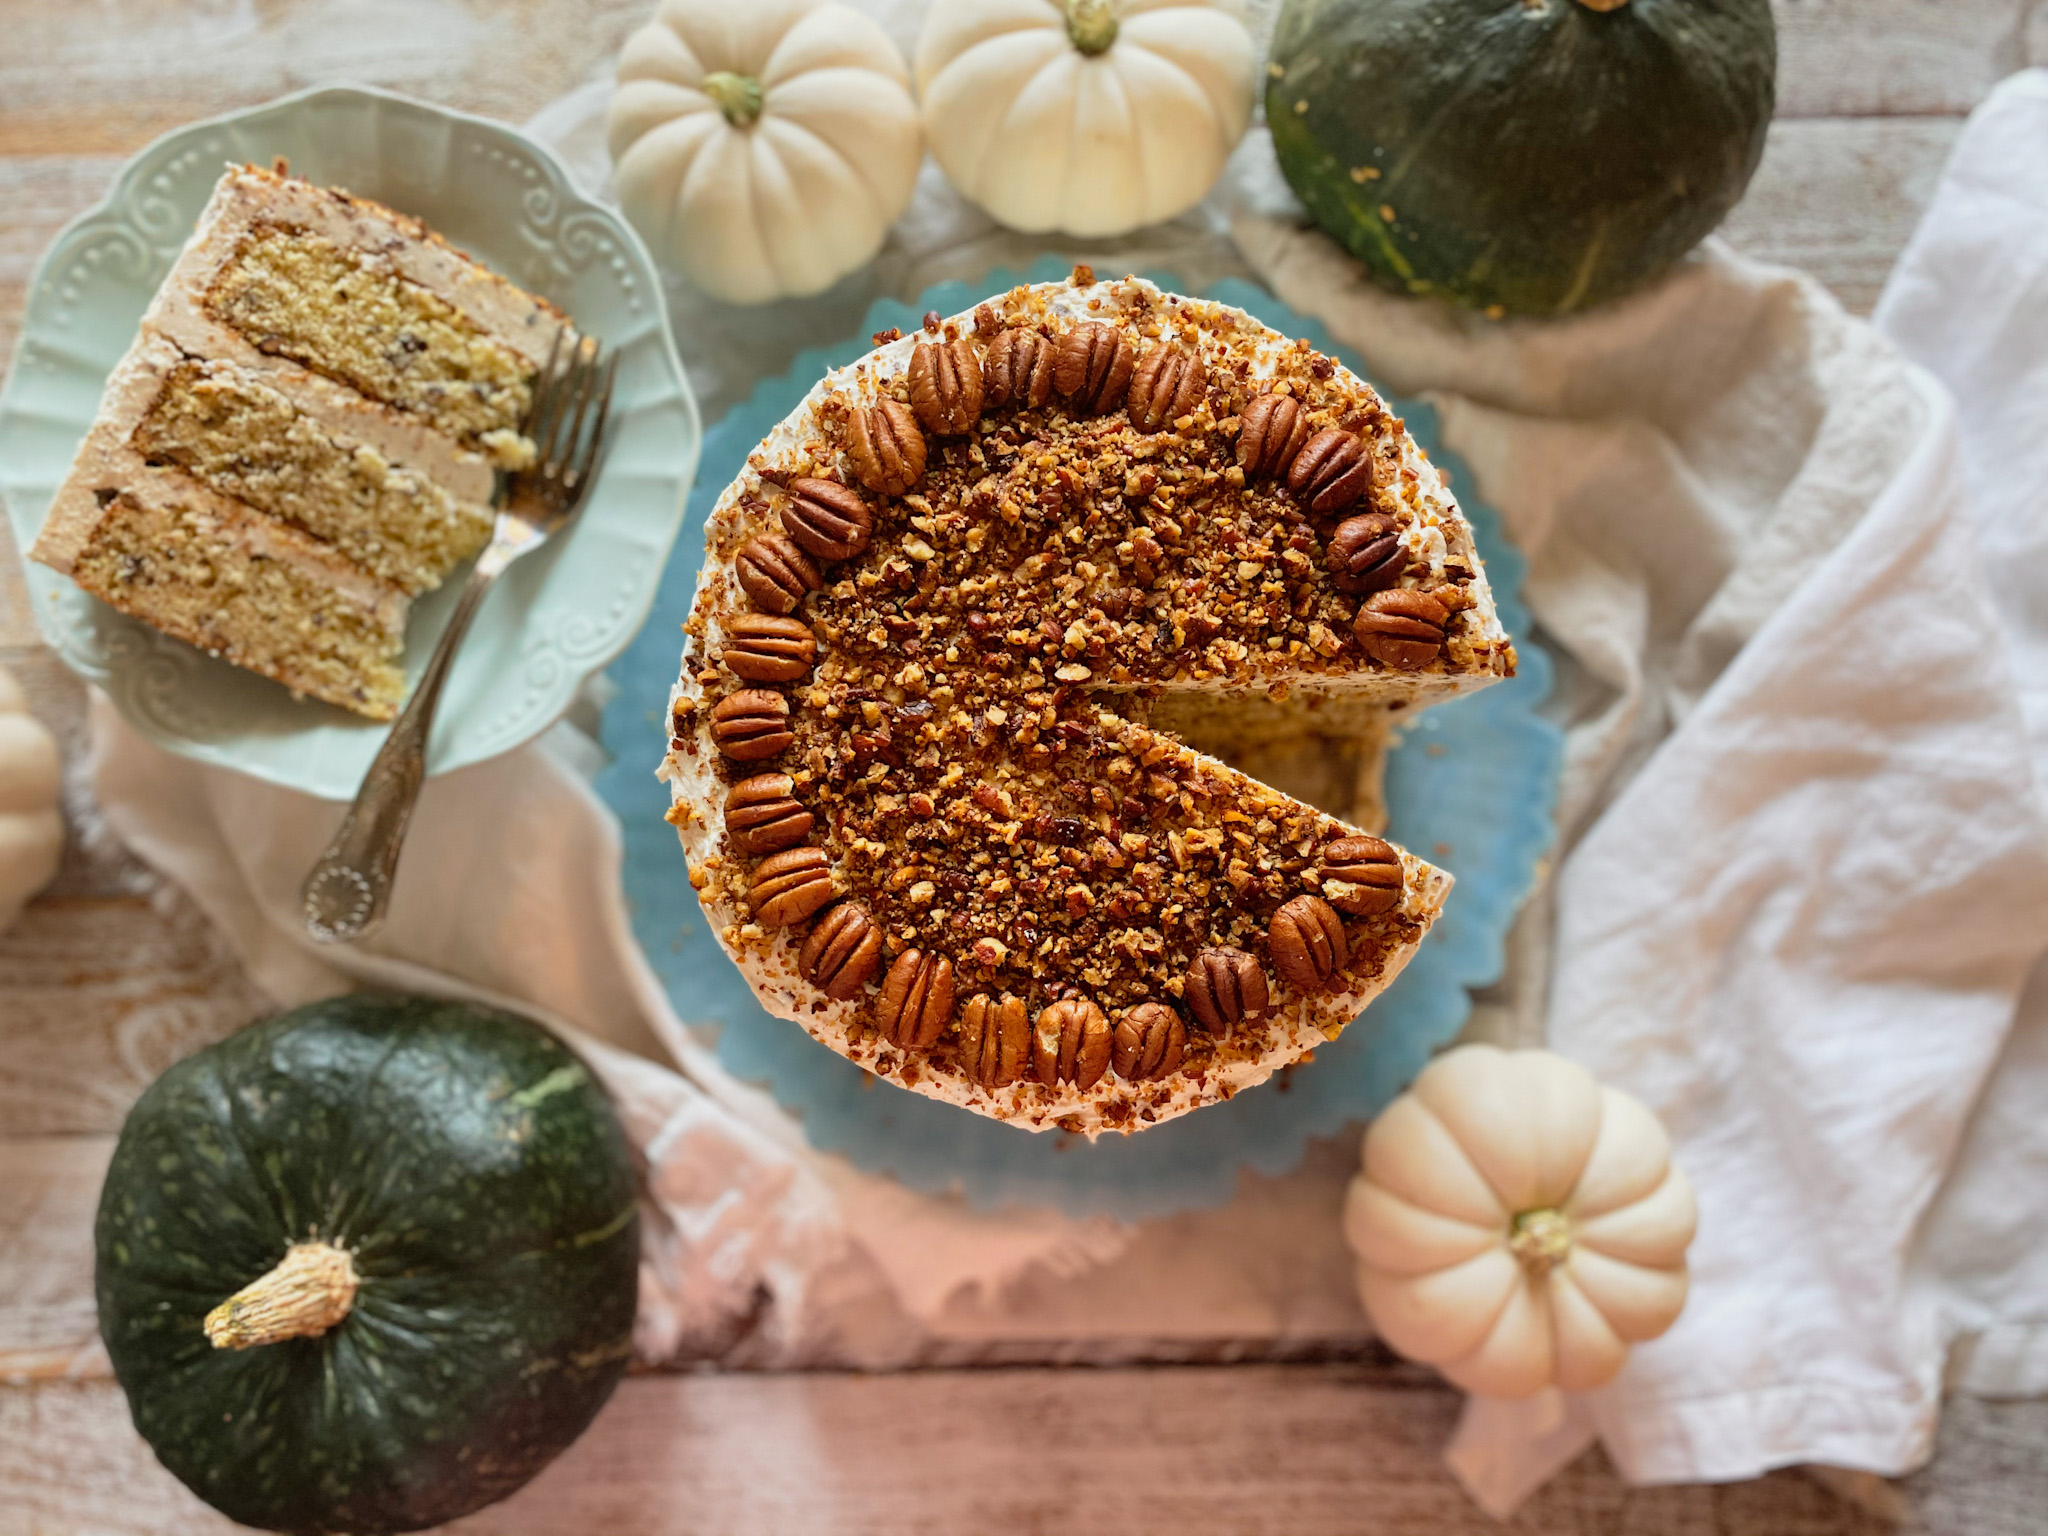 Butter pecan cake with a slice out on a plate and green and white pumpkins